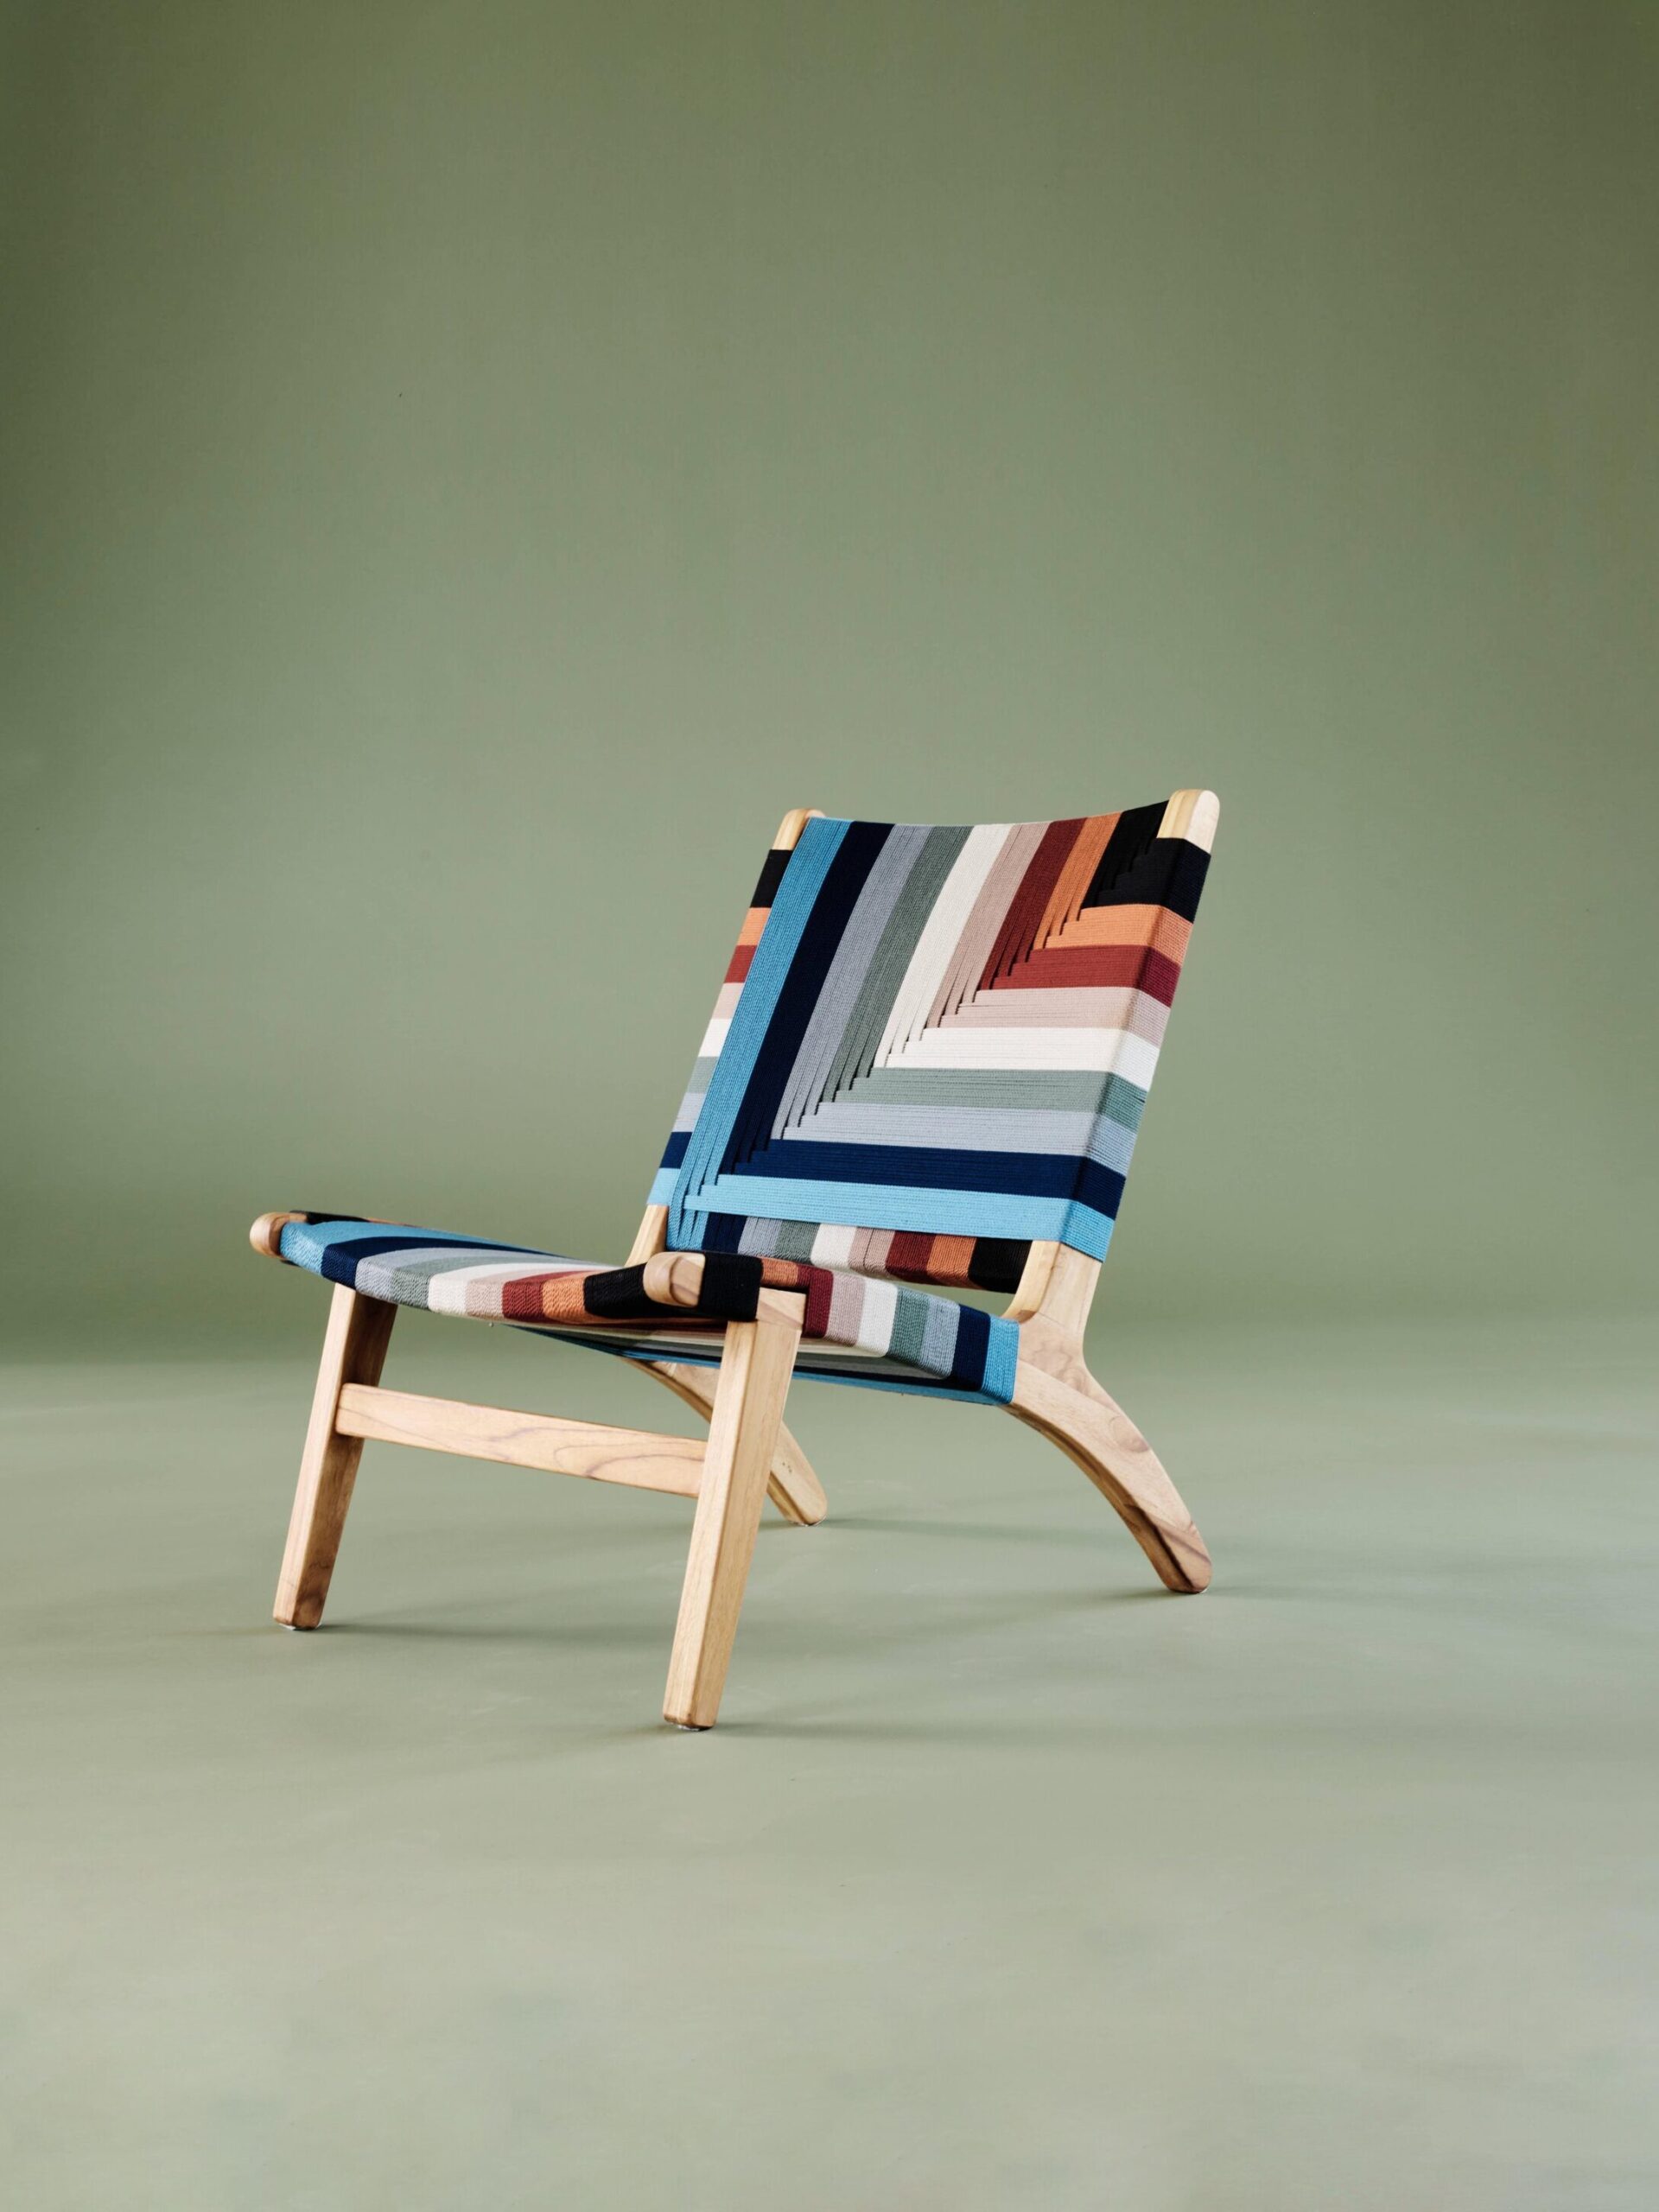 A wooden chair with a colorful, geometric patterned fabric backrest and seat, positioned against a muted green background.